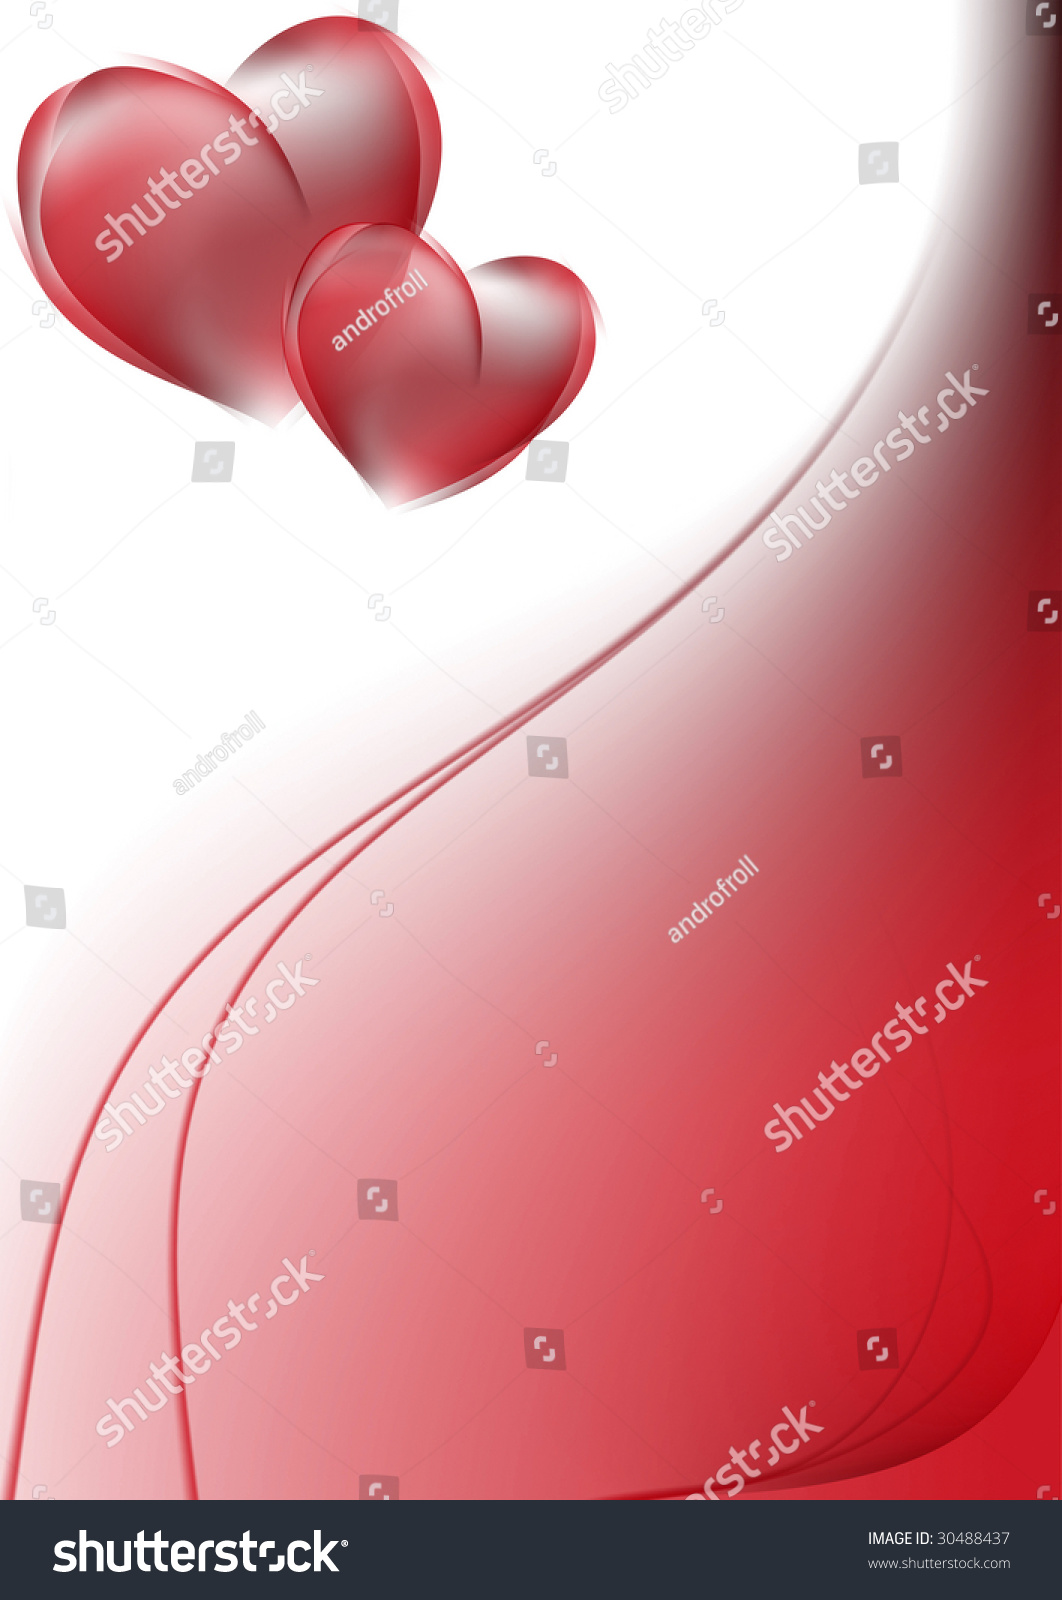 Abstract Background Red Curves. Wedding Card Stock Photo 30488437